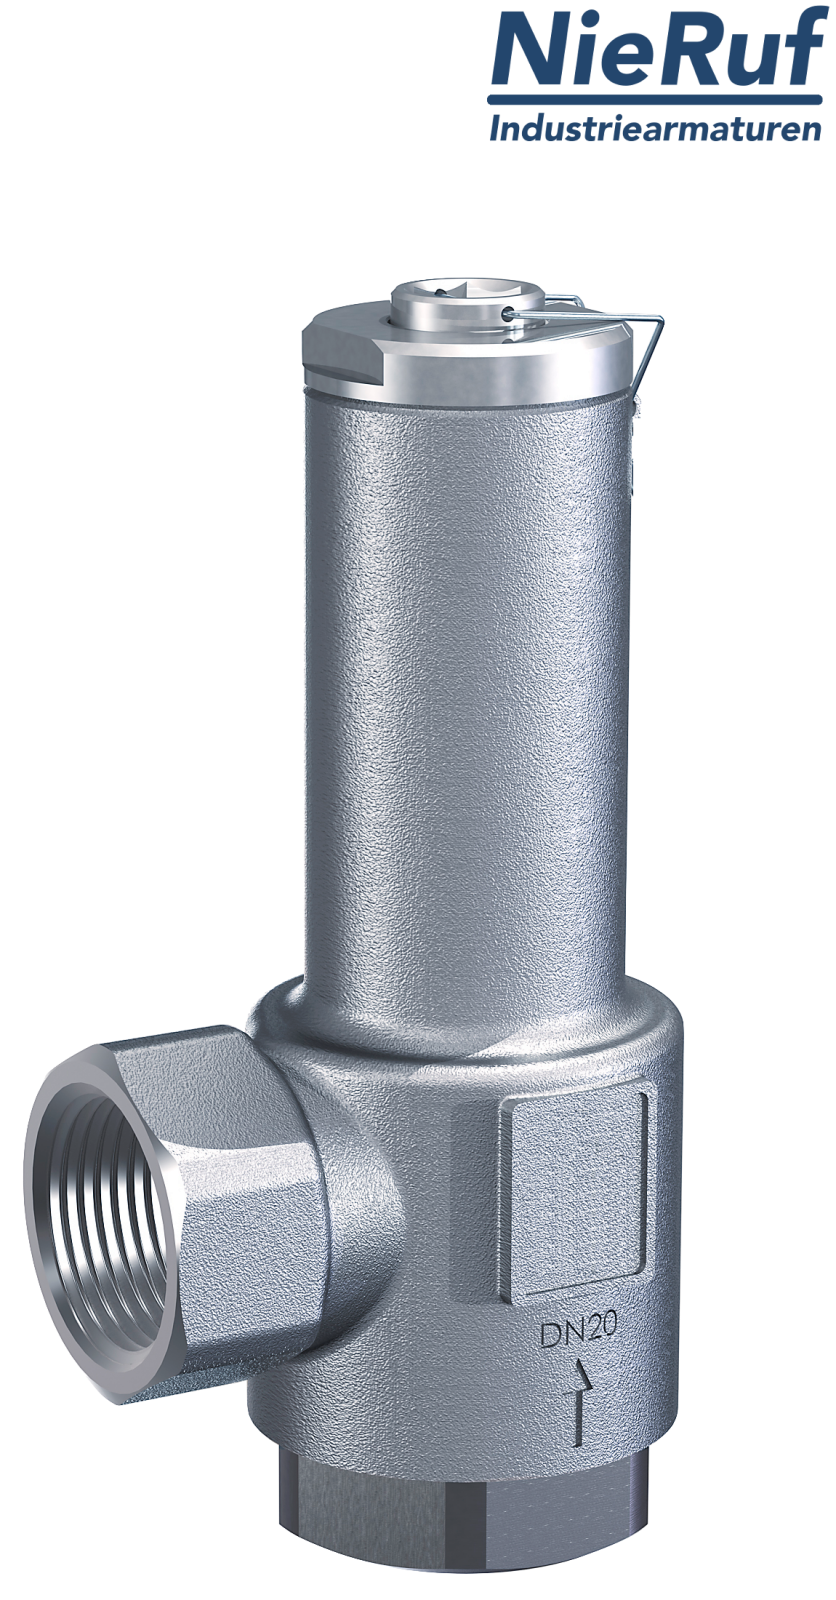 angle-type overflow valve 1 1/2" inch fm UV03 stainless steel AISI 316L 2 - 12 bar